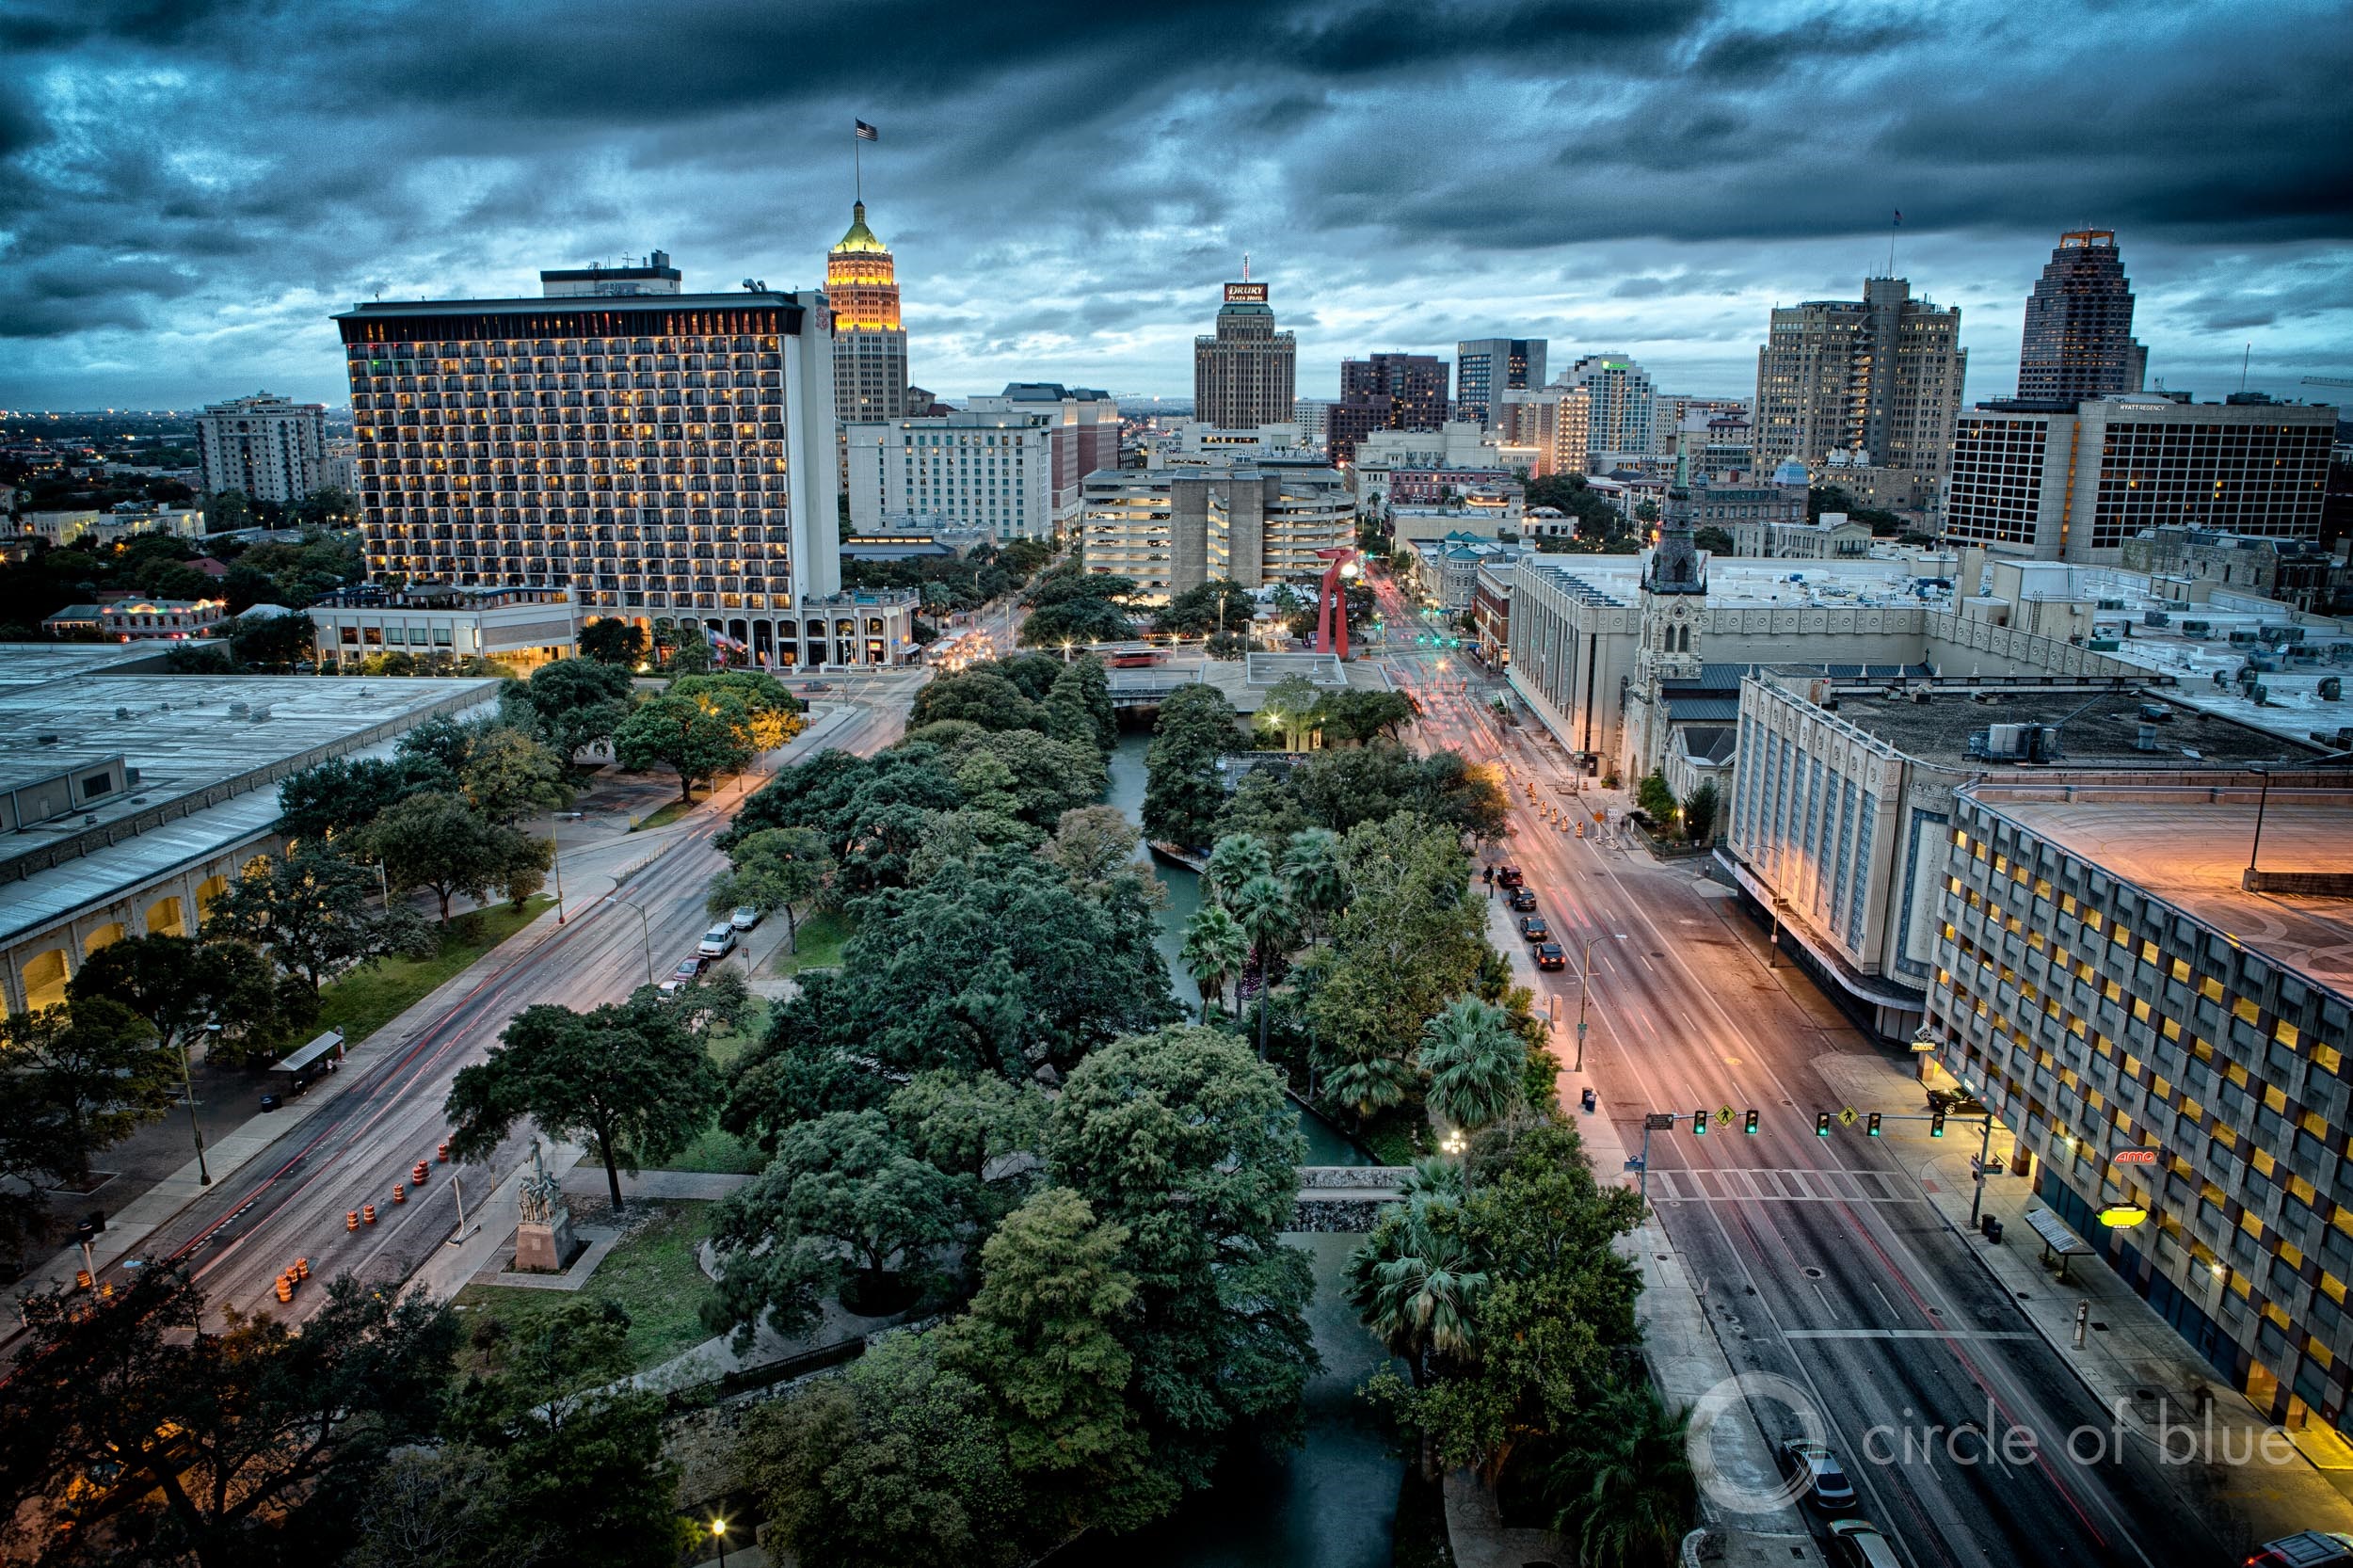 The 2017 Texas water plan forecasts a 62 percent increase in municipal water demand by 2070, driven in large part by growing metropolises such as San Antonio, pictured above. Photo © J. Carl Ganter / Circle of Blue